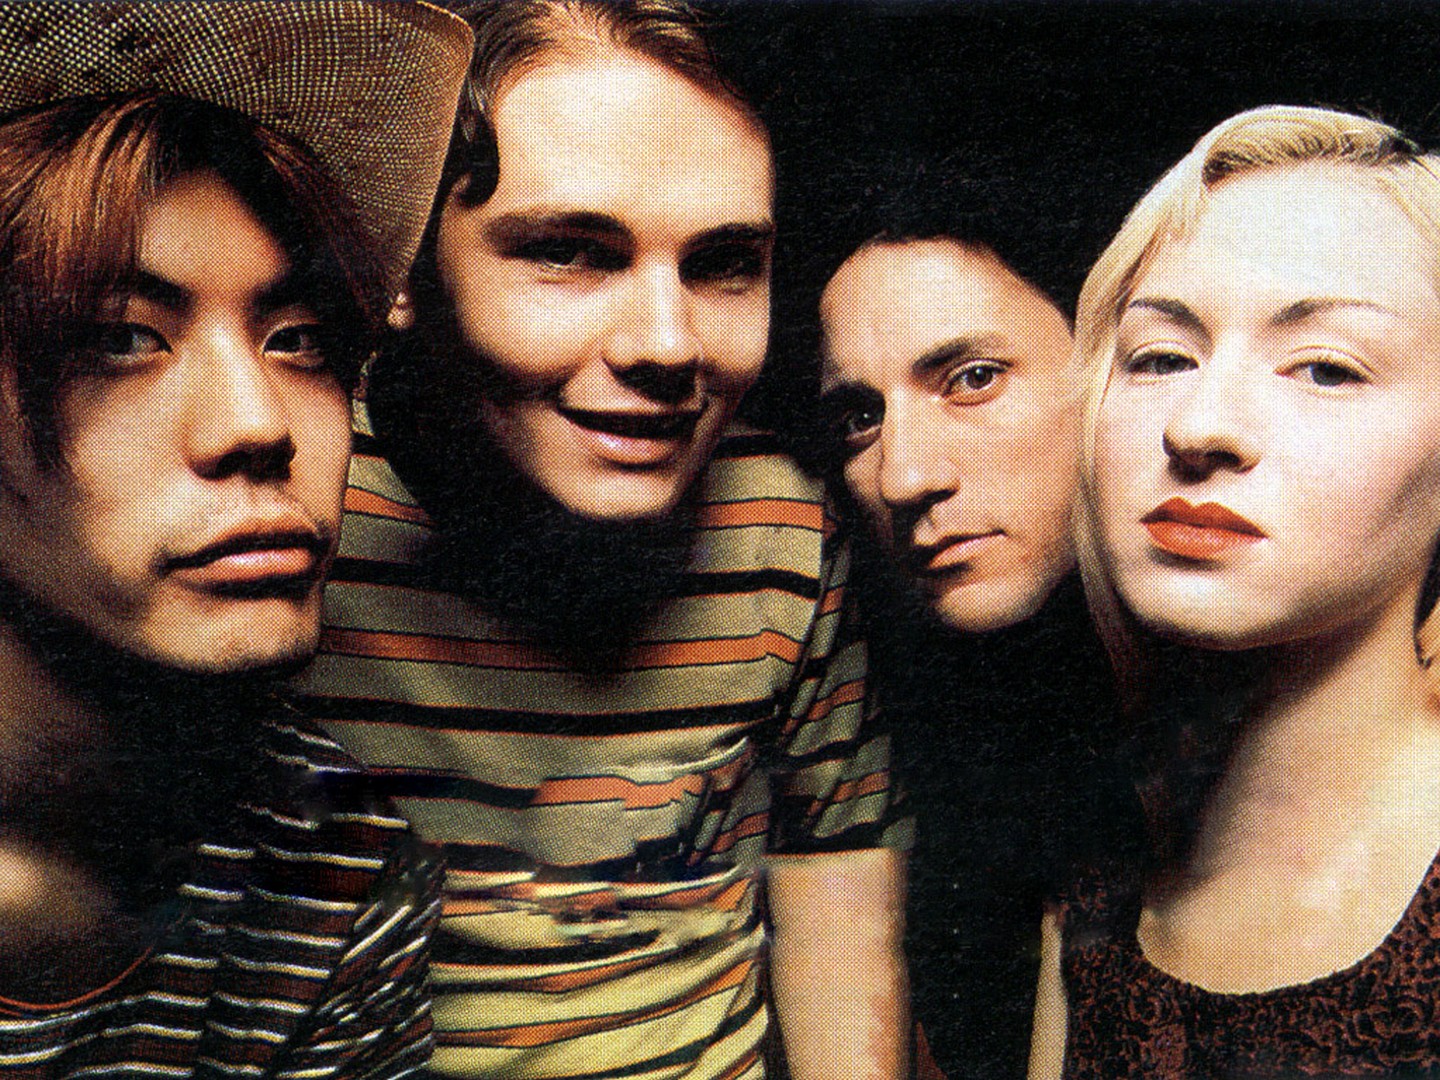 Following Are My Top Favorite Songs From The Smashing Pumpkins